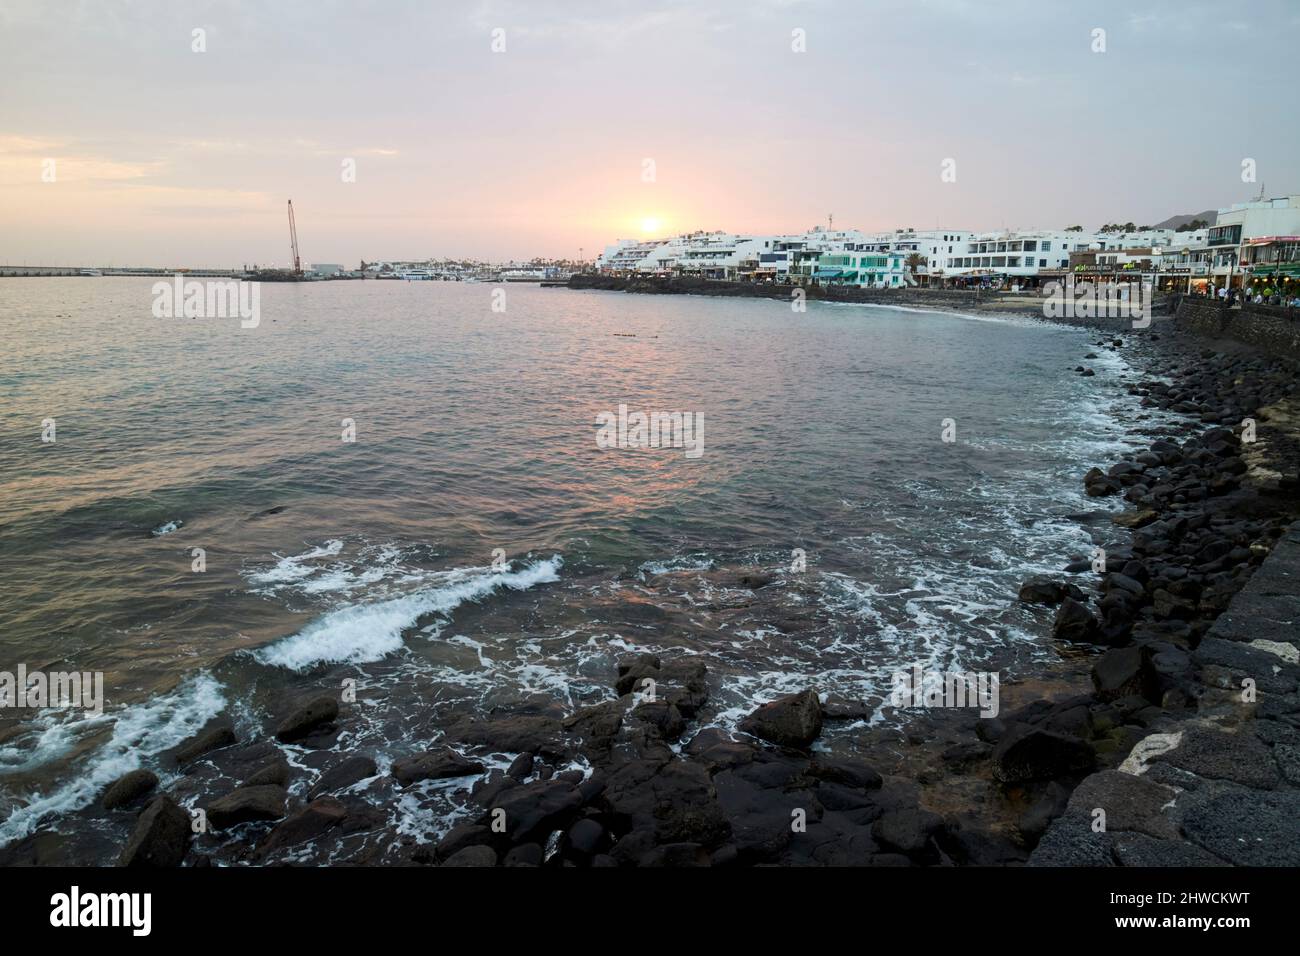 beach and coastal promenade in the evening at sunset playa blanca lanzarote canary islands spain Stock Photo